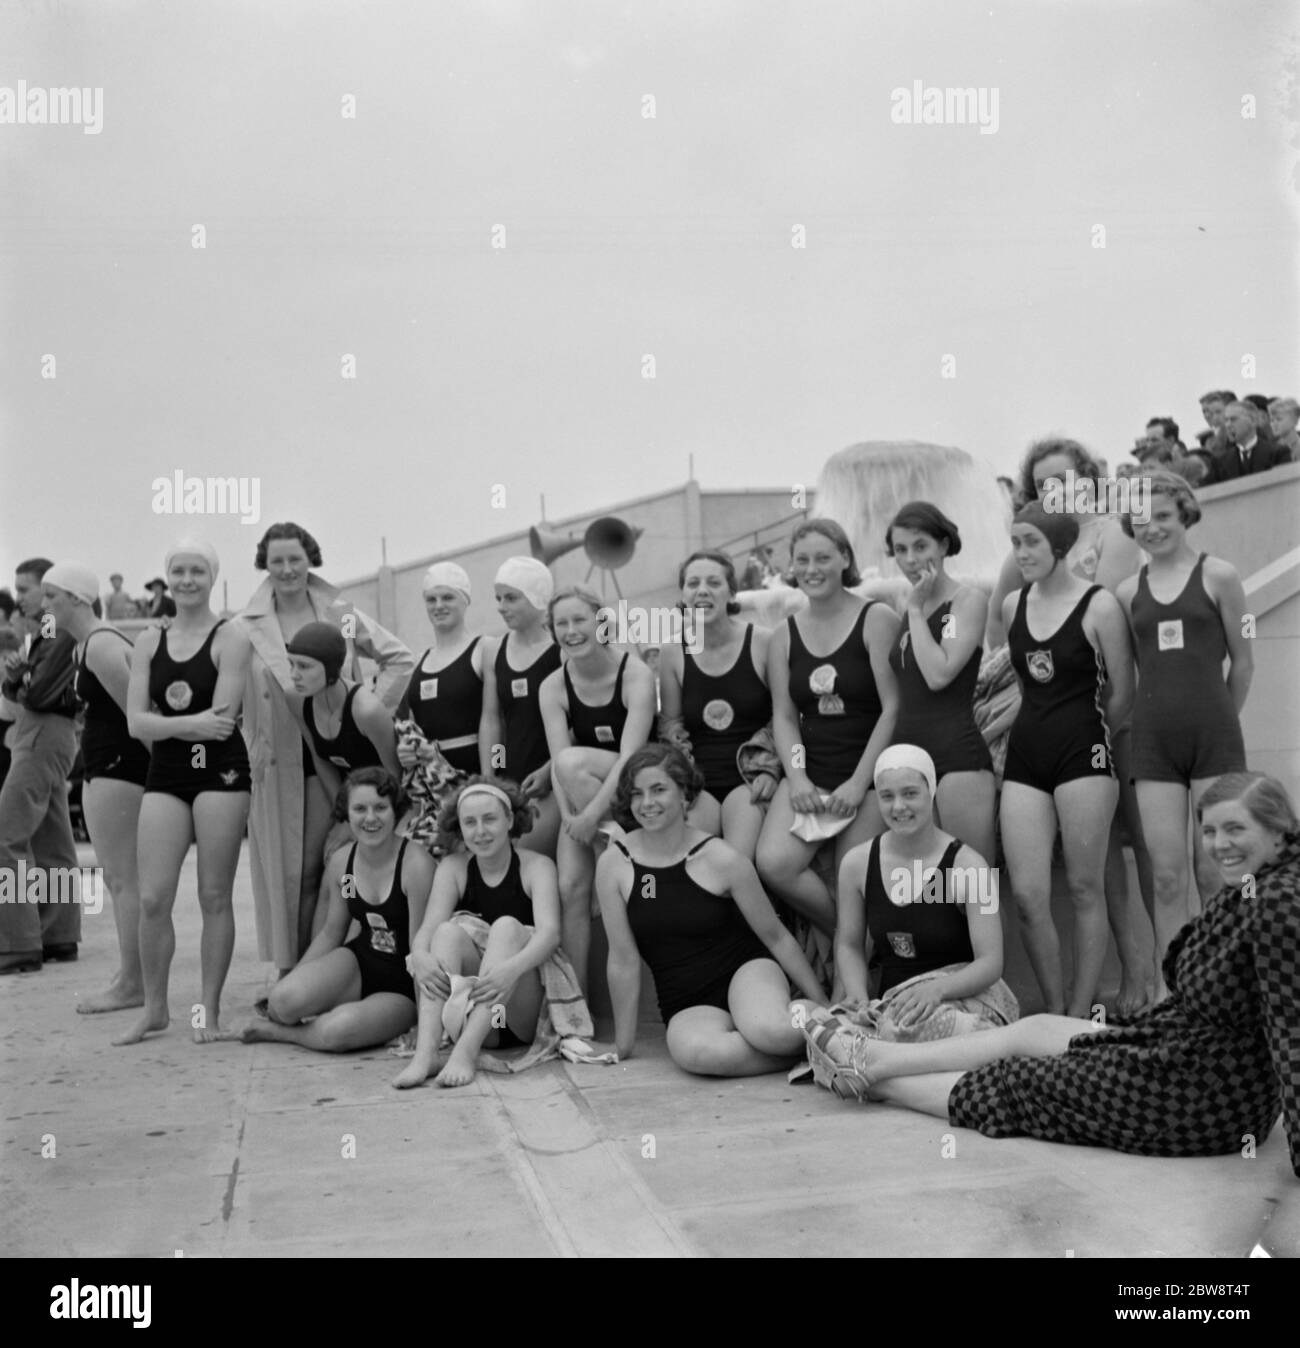 The opening of Swanscombe Baths in Kent . The bathers posing for a ...